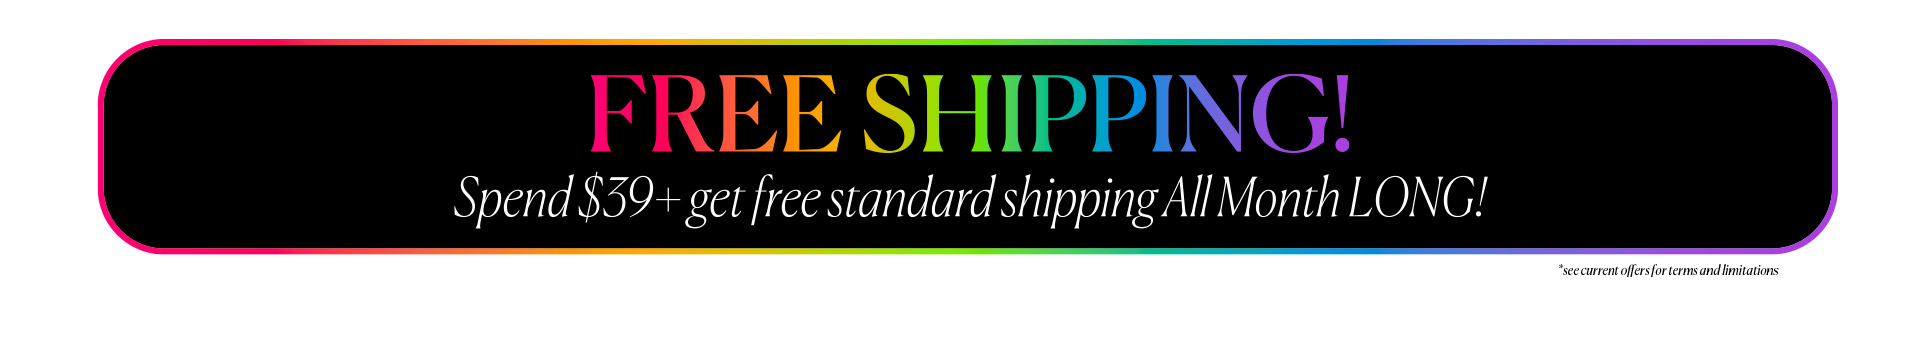 Free Shipping - Spend $39+ and get free standard shipping ALL MONTH LONG!